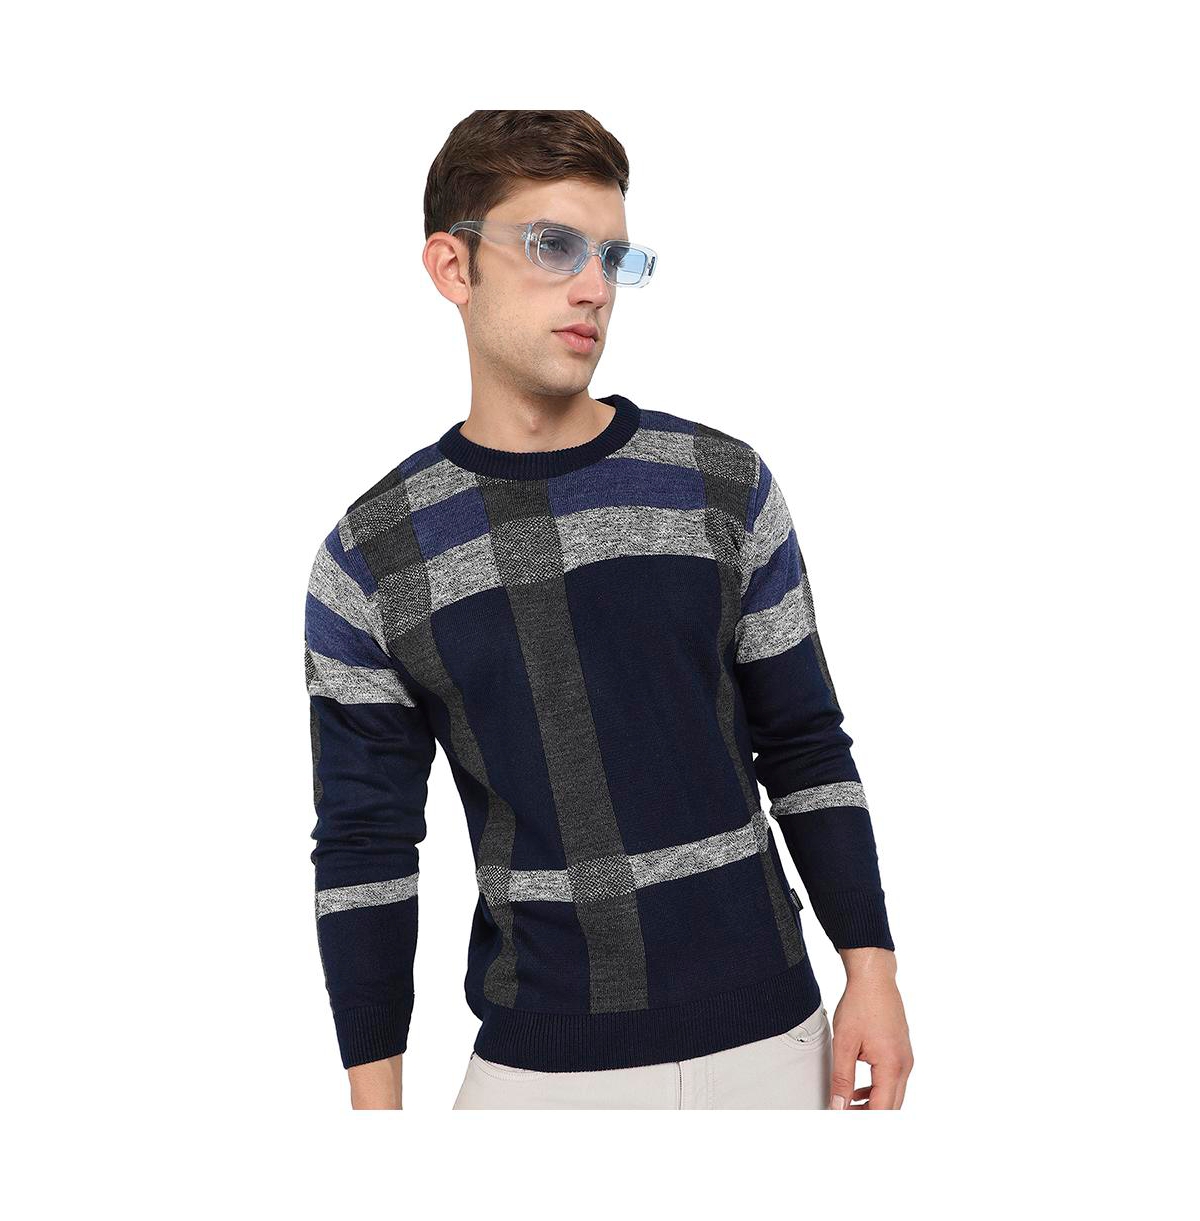 Men's Blue & Grey Heathered Contrast Panel Pullover Sweater - Multicolor